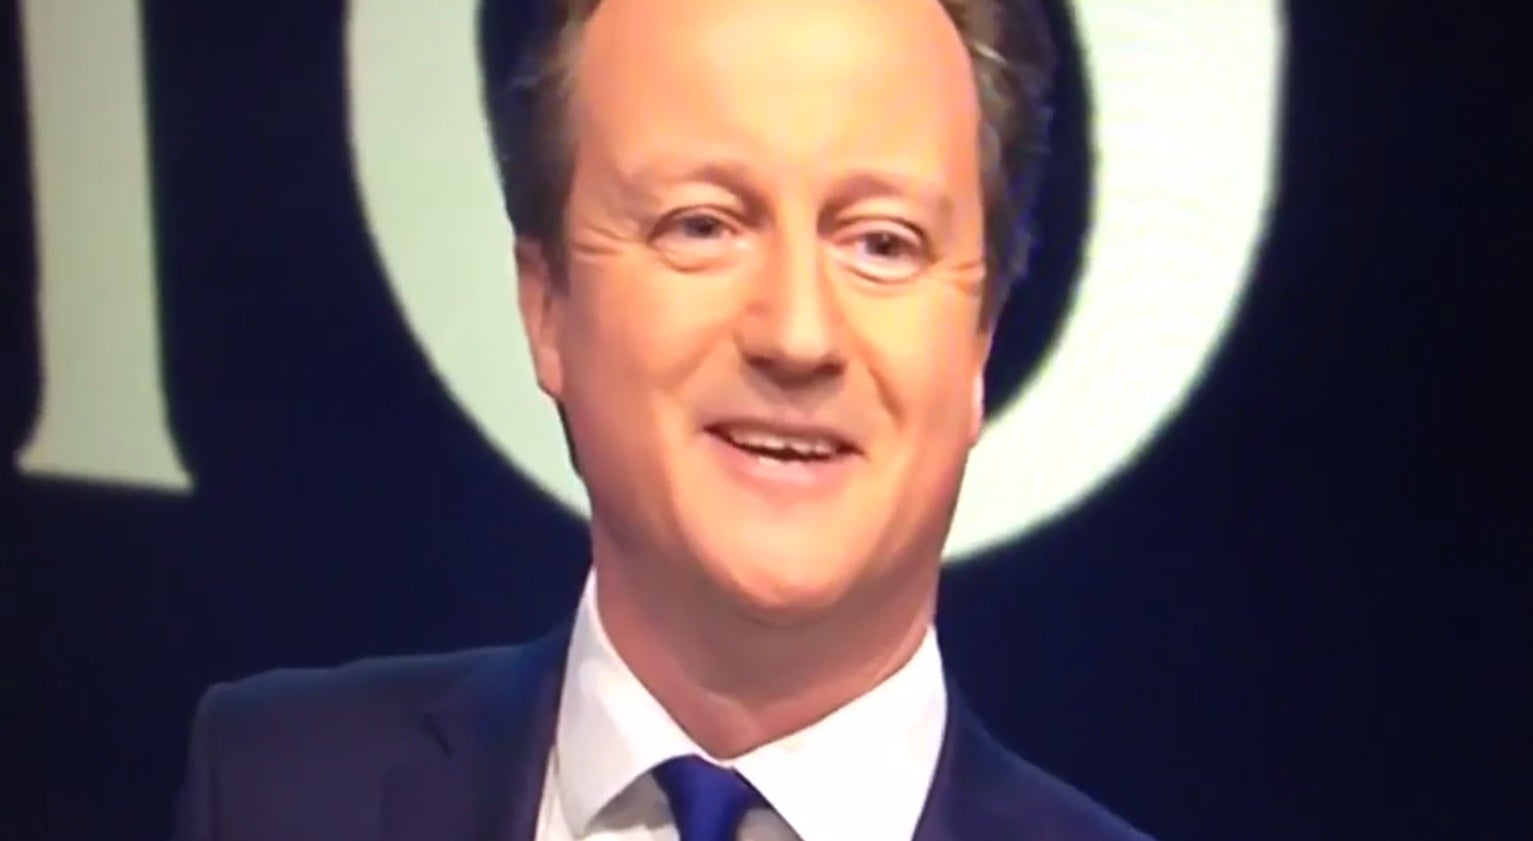 David Cameron seemed to be expecting the 1D star